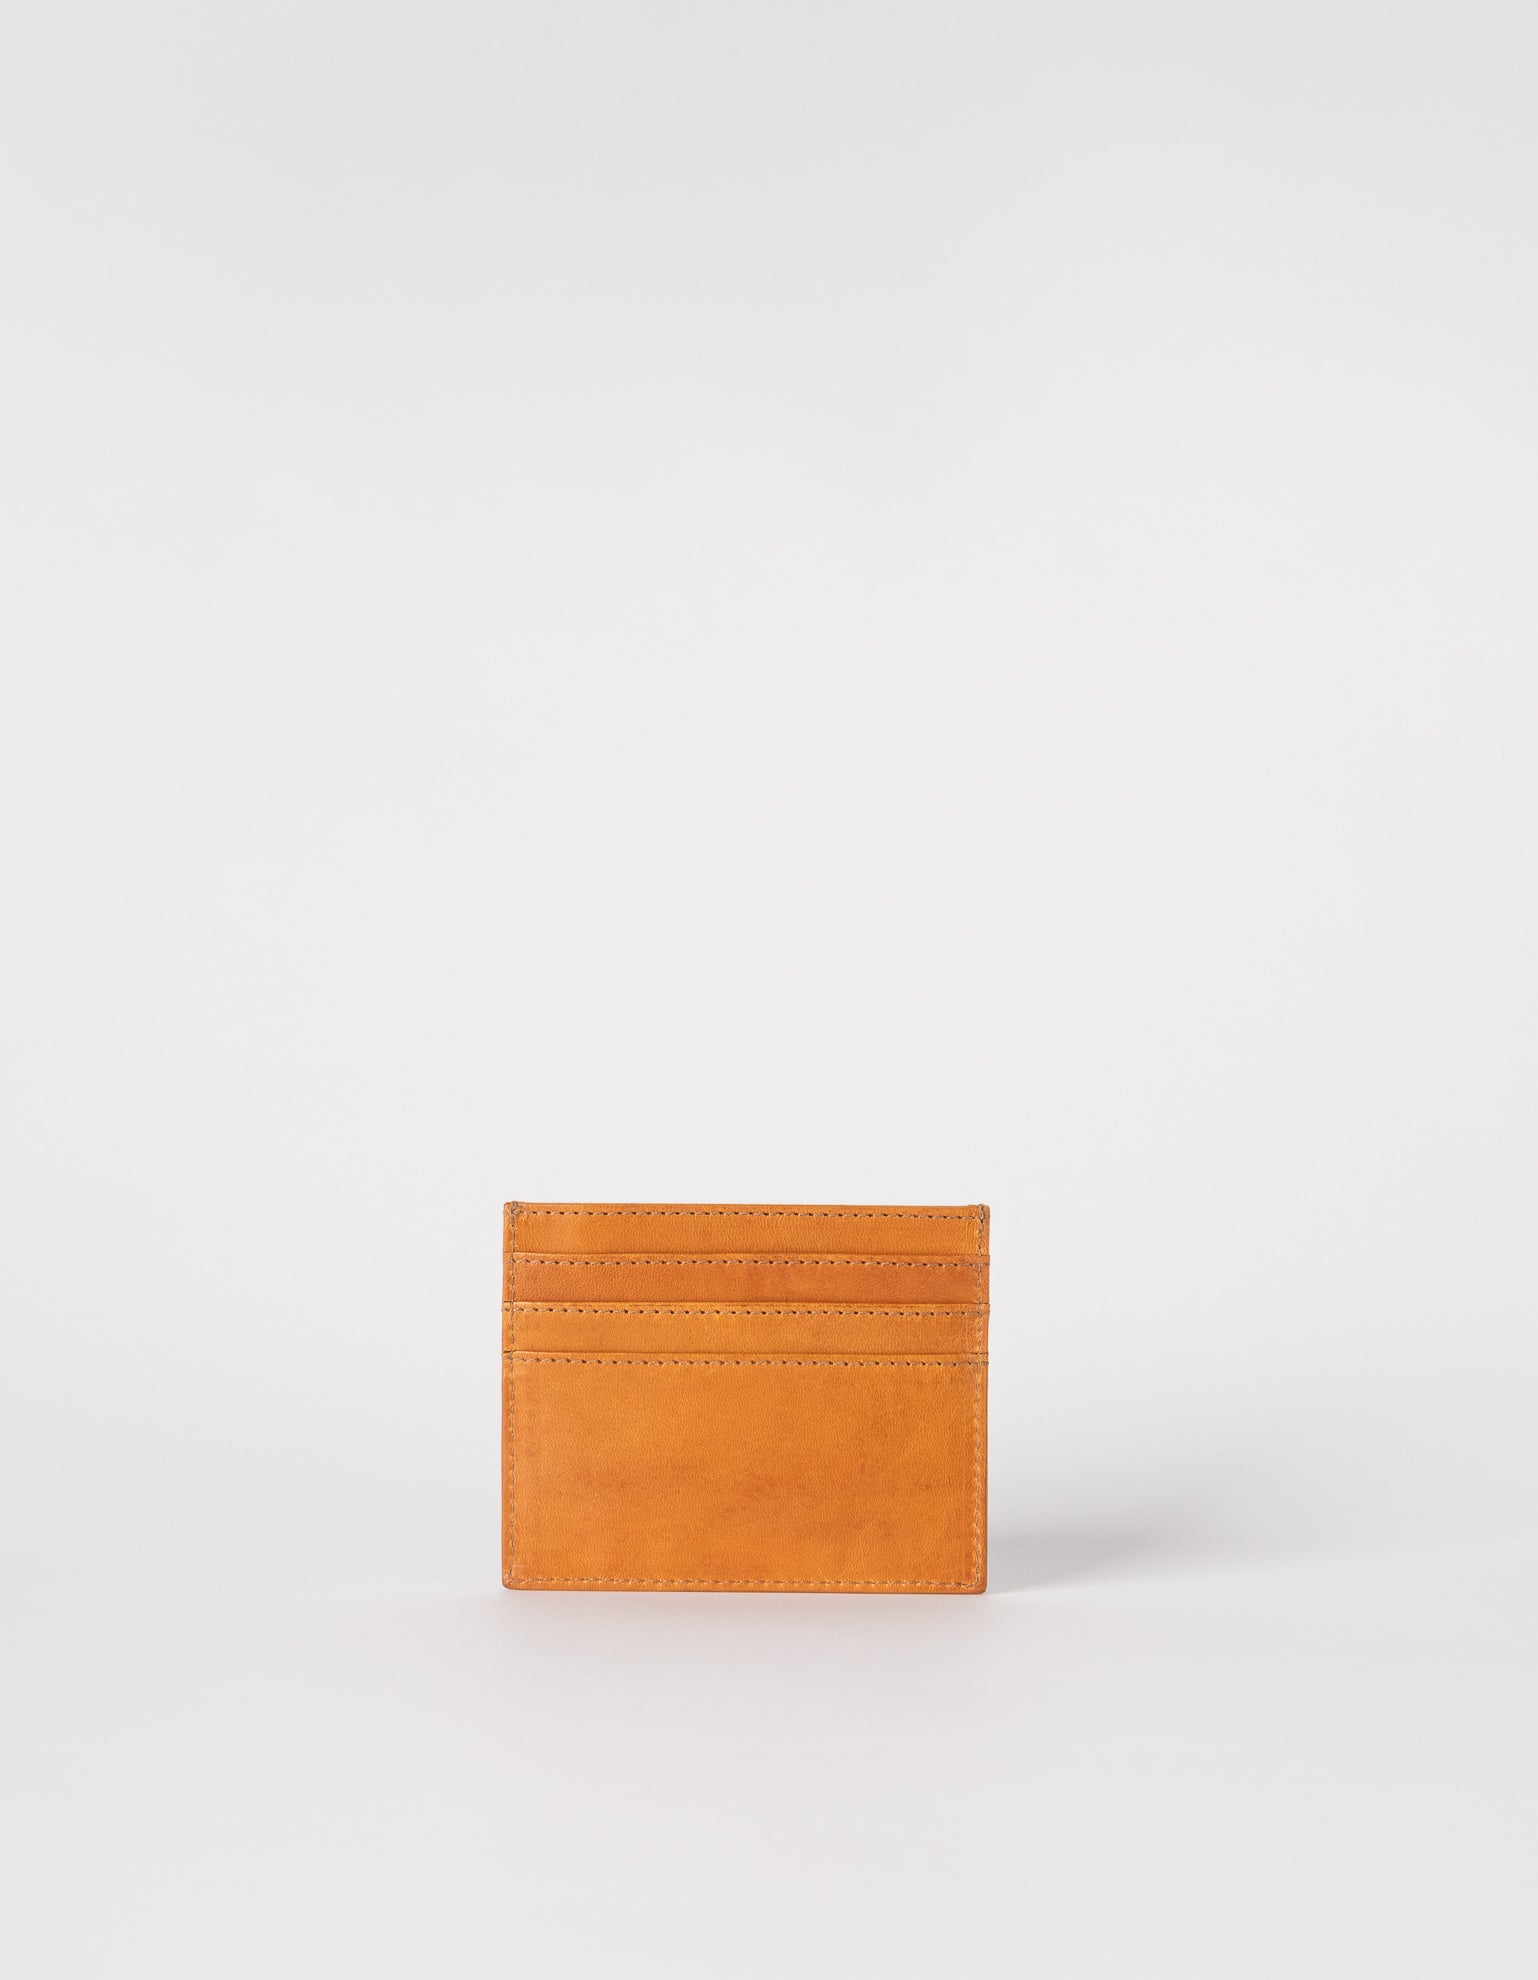 Mark's Cardcase Cognac Leather - Back Product Image